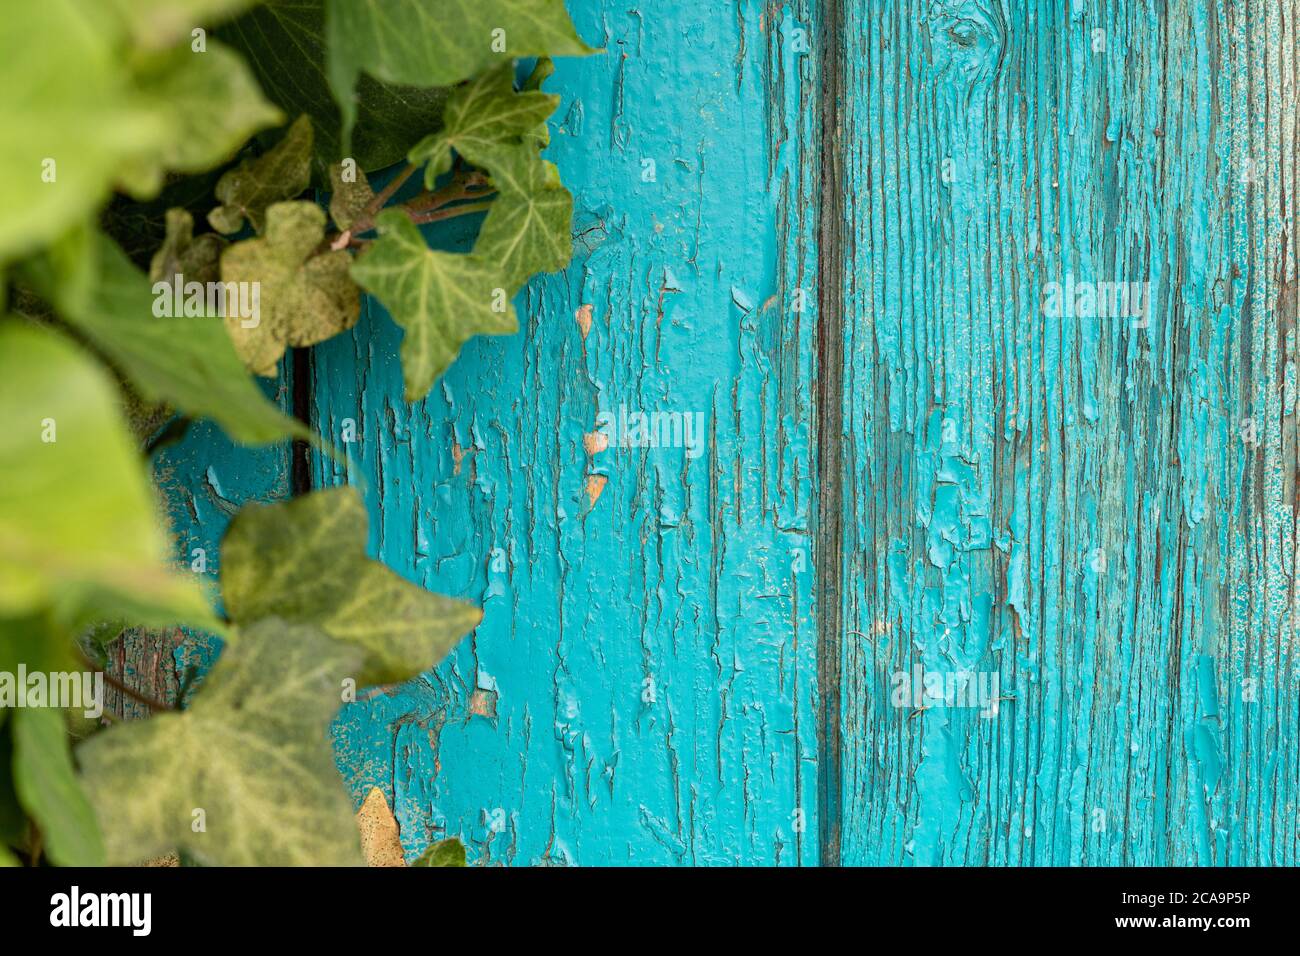 Surface of an empty turquoise wooden plank background with weathered rustic paint and a frame of green ivy leaves on the left side. Copy space. Stock Photo